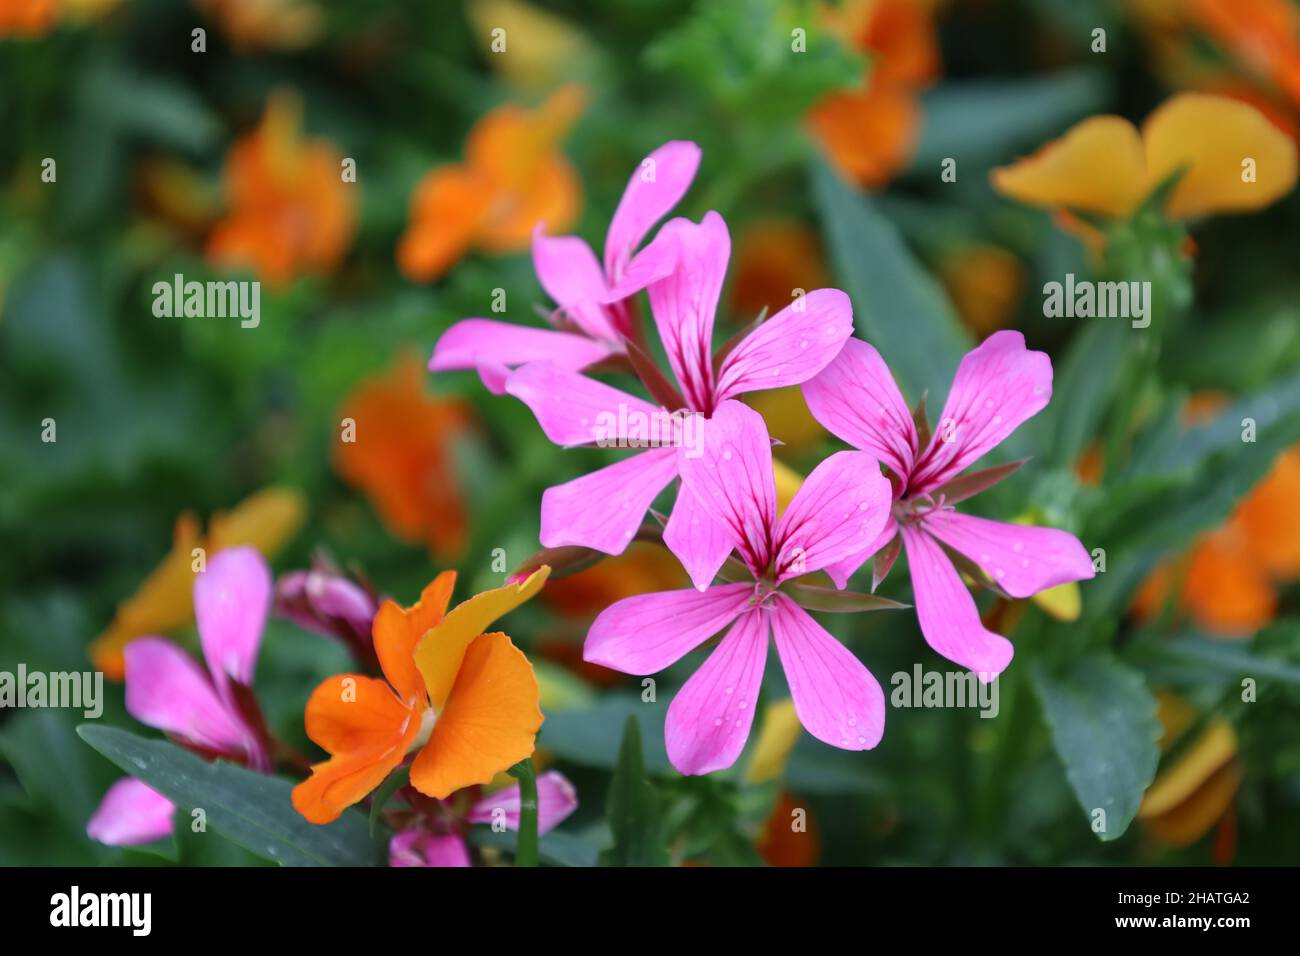 Linz Germany June 2021 Close-up of a colourful flowering ivy geranium in natural sunlight Stock Photo